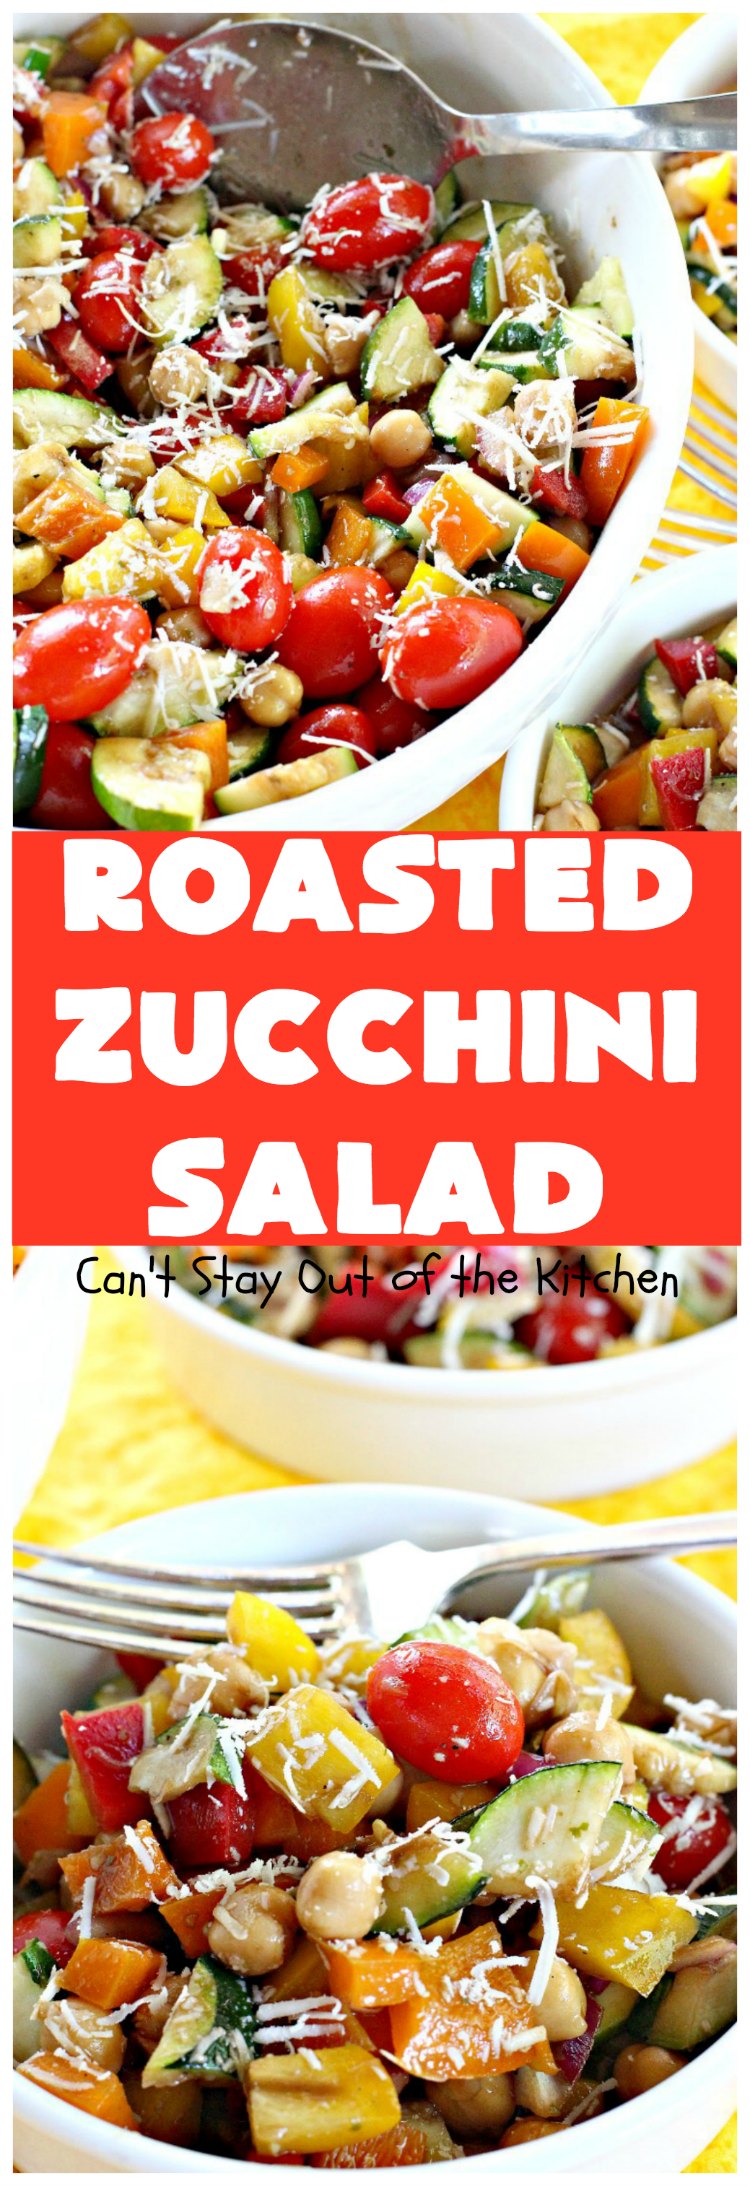 Roasted Zucchini Salad | Can't Stay Out of the Kitchen